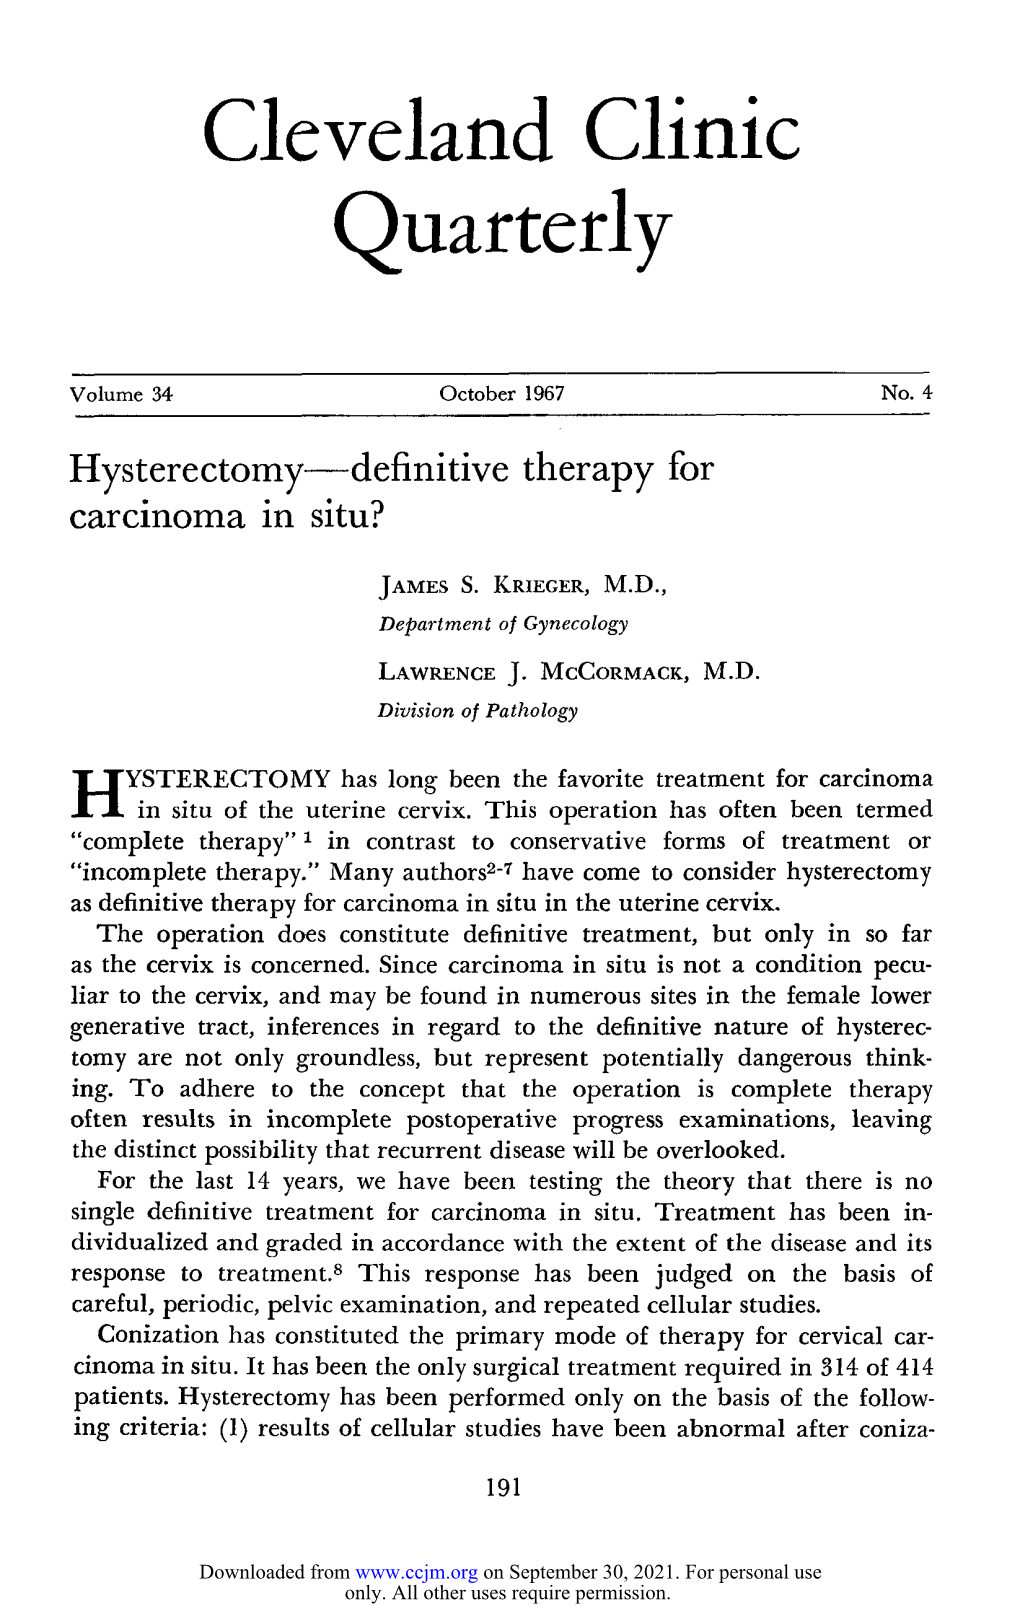 Hysterectomy—Definitive Therapy for Carcinoma in Situ?